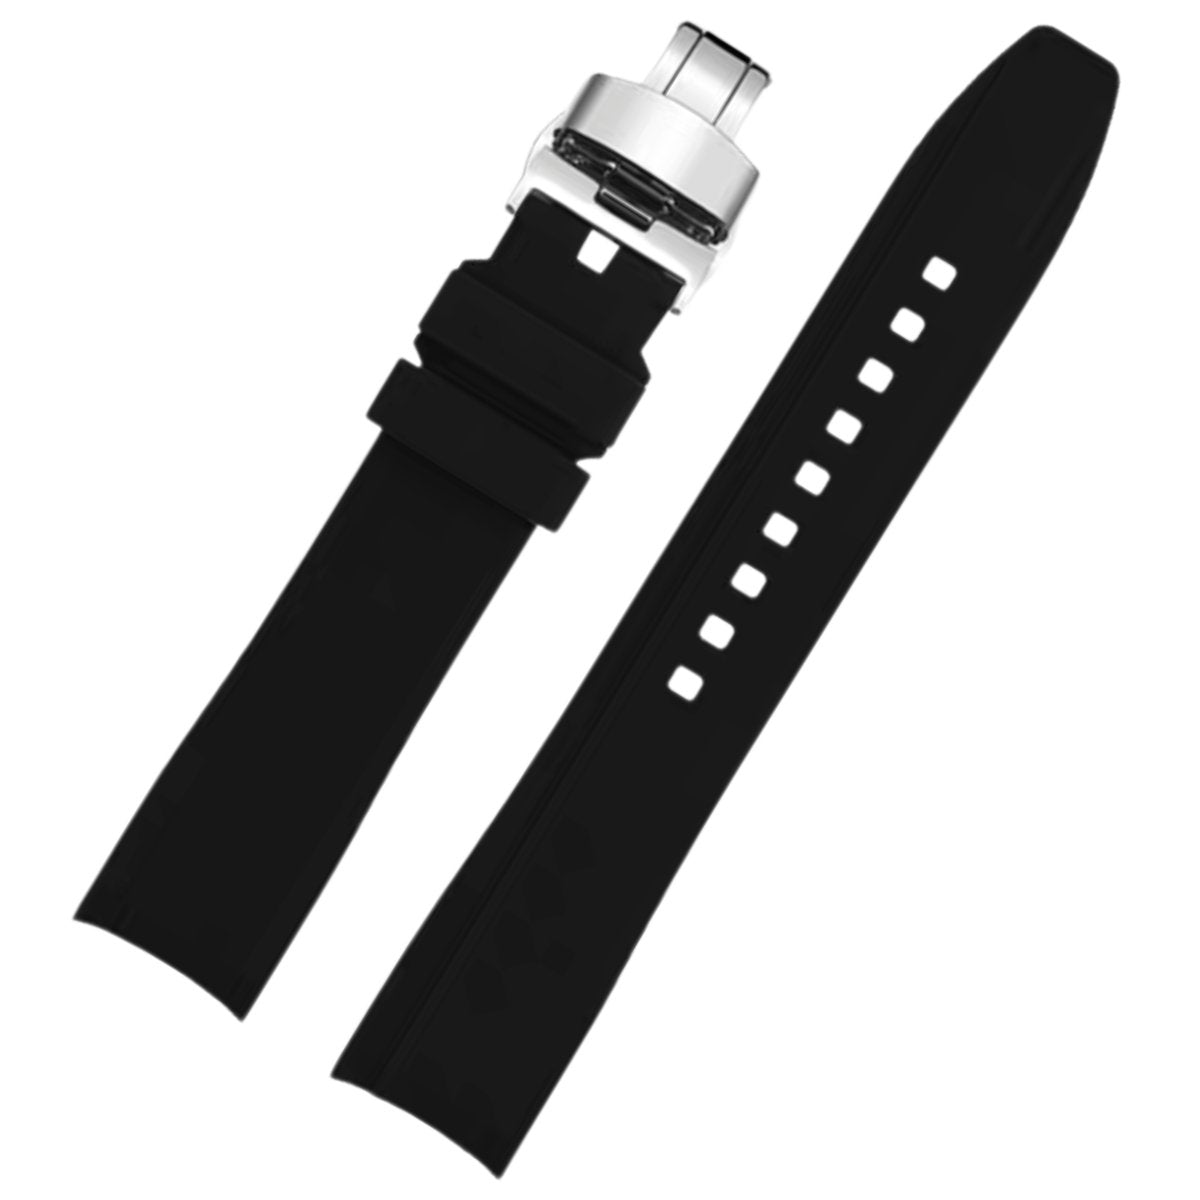 Dexter Silicone Curved Lug End Strap Black (Silver Deployment Clasp) (Rolex Replacement) -StrapSeeker